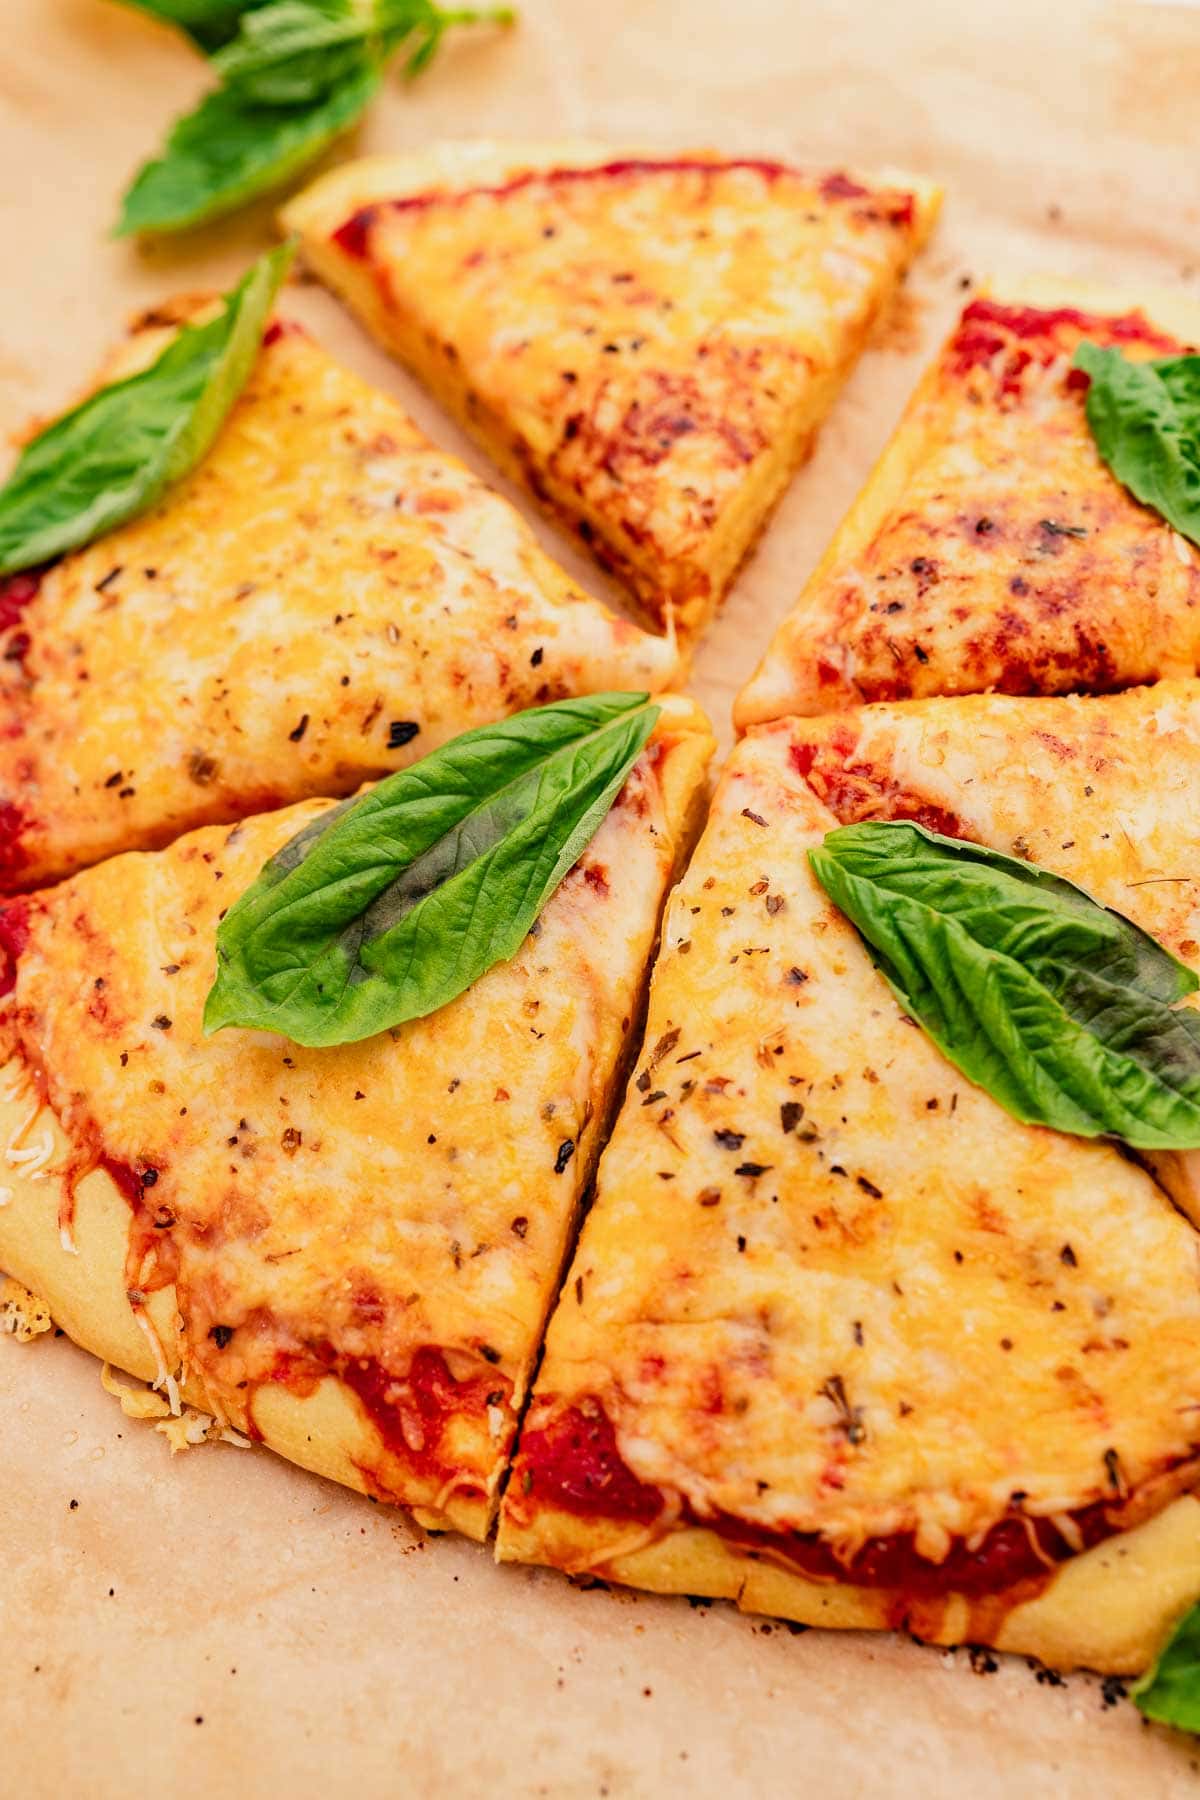 Sliced cheese pizza with a chickpea flour crust, topped with fresh basil leaves.